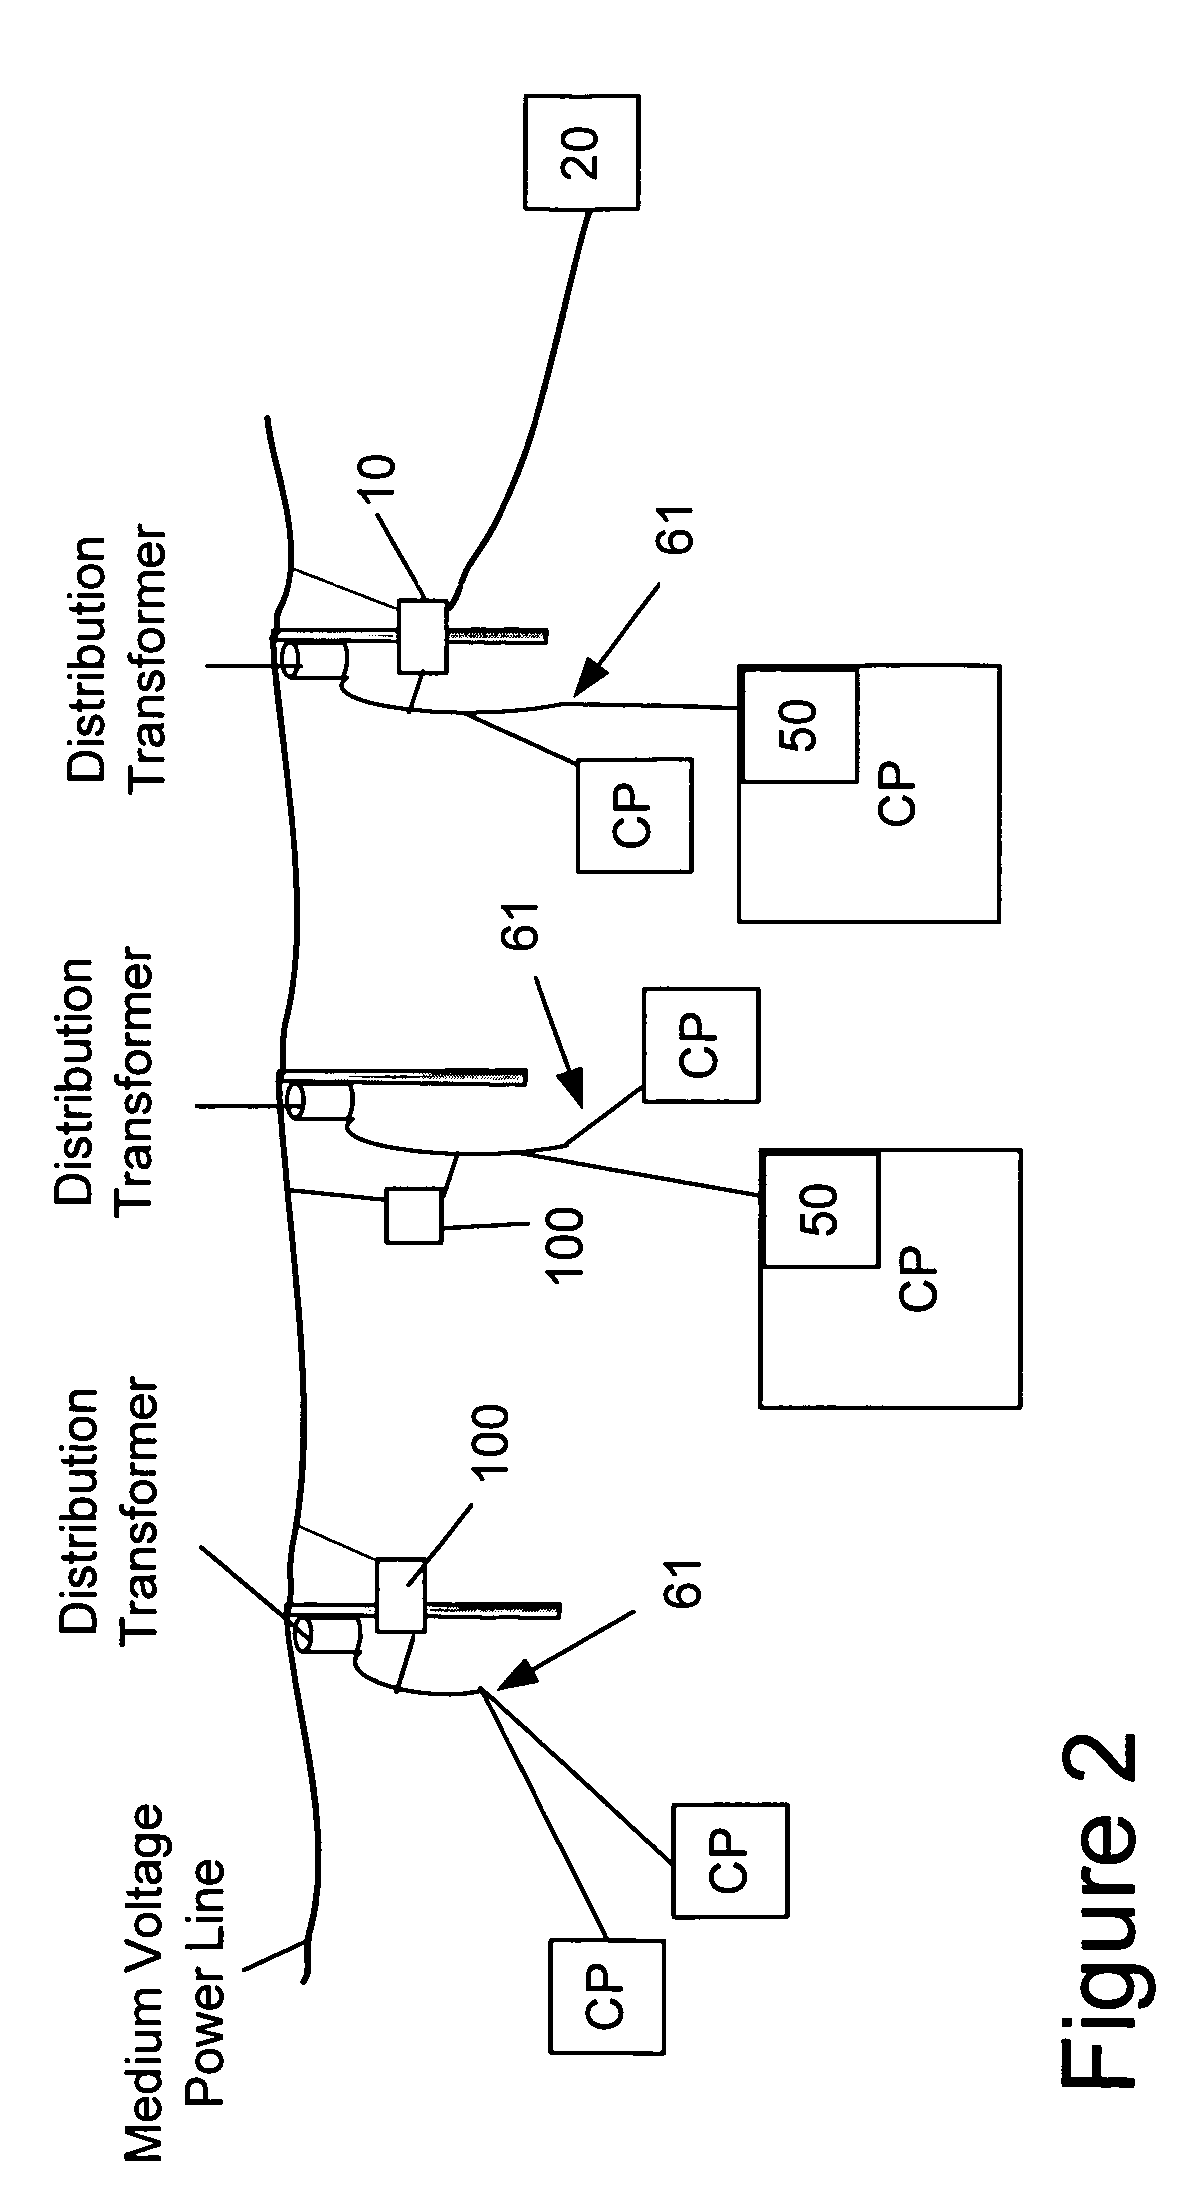 Power line repeater system and method